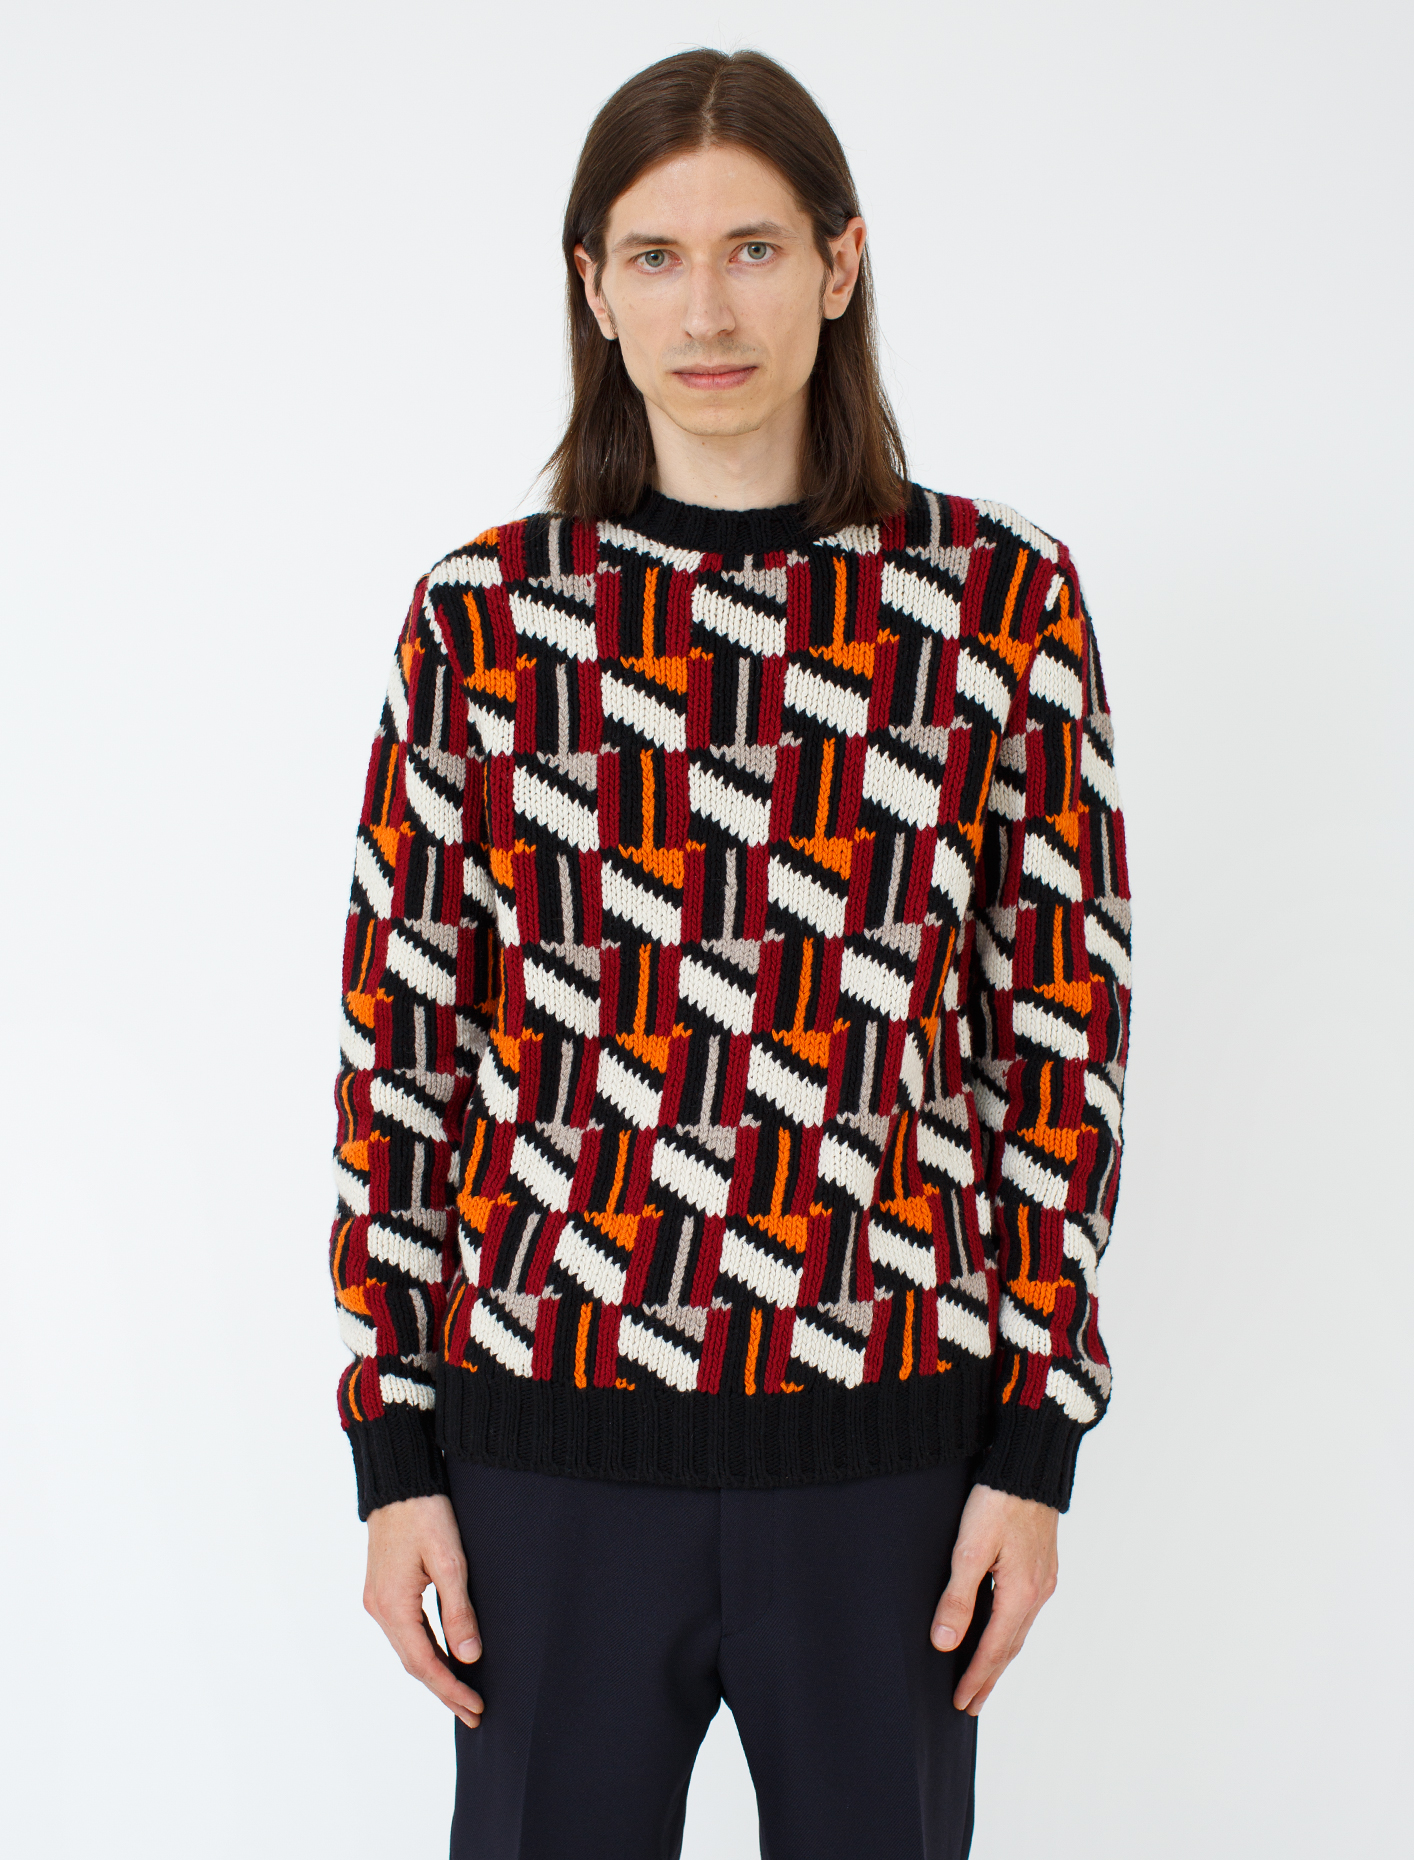 Prada Hand-Knitted Wool Cashmere Pullover | Voo Store Berlin ...